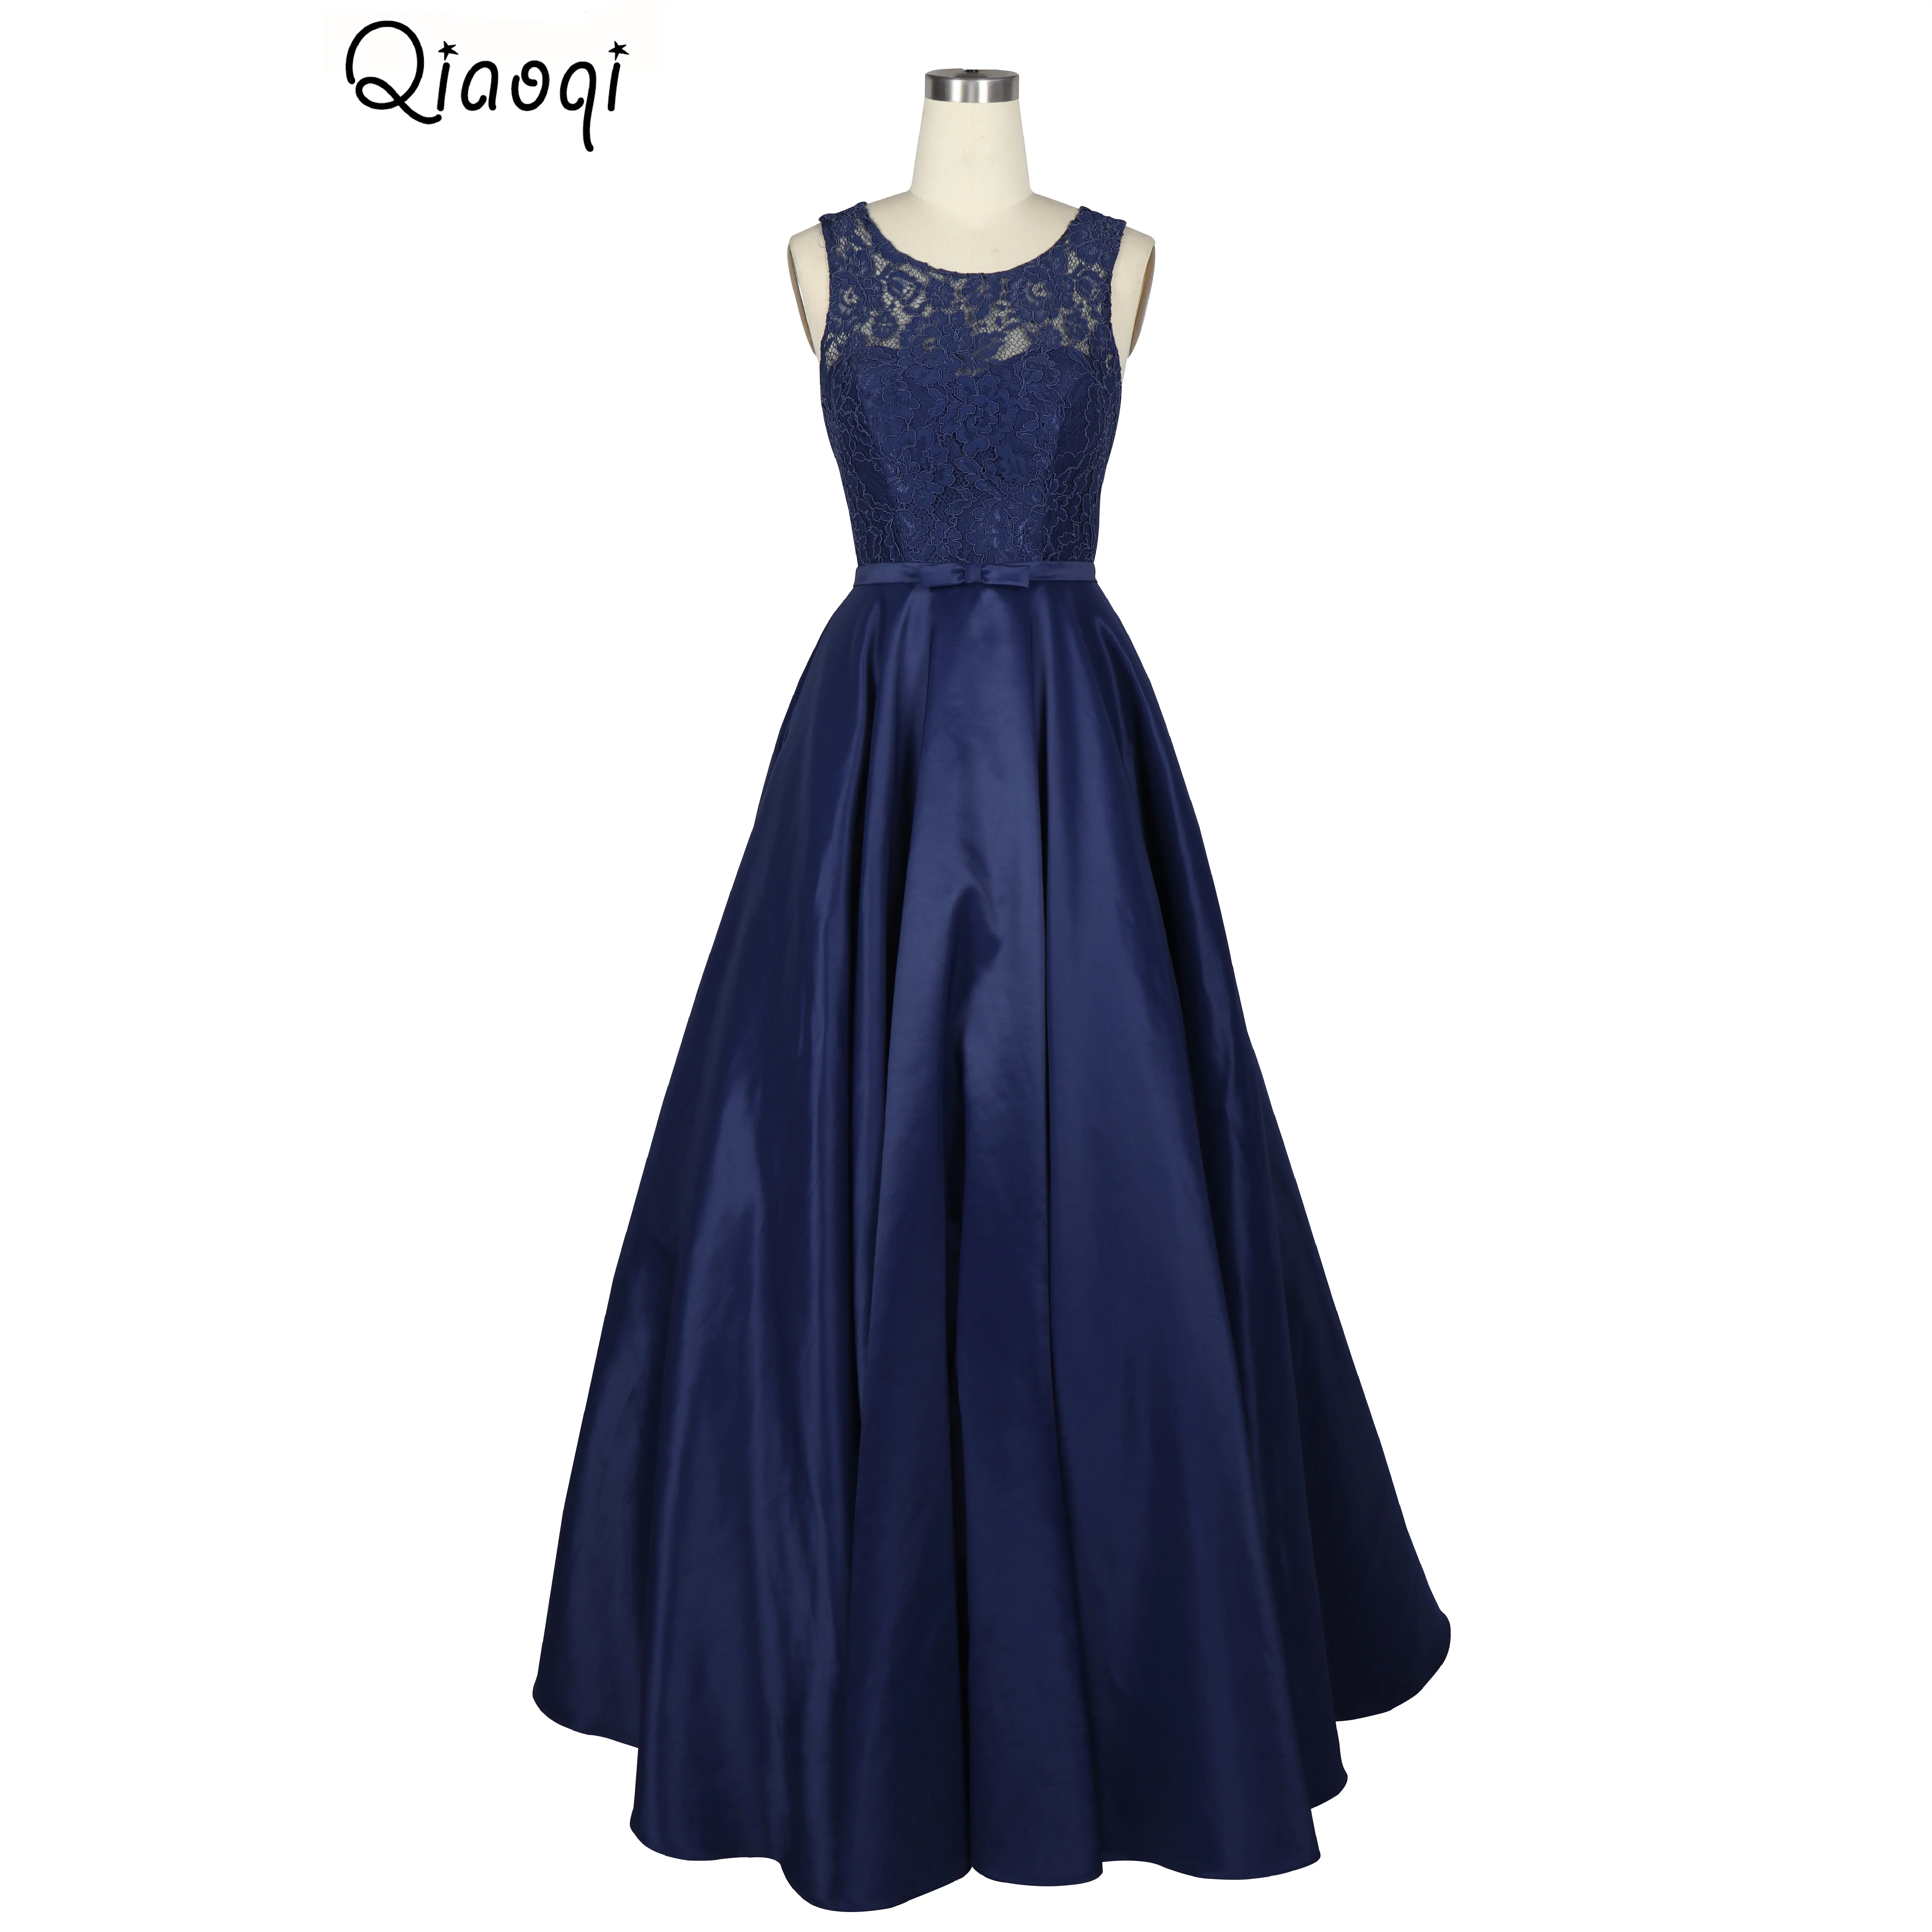 New Navy Blue Sleeveless A Line Lace Appliques Formal Party sweet quinceanera dress